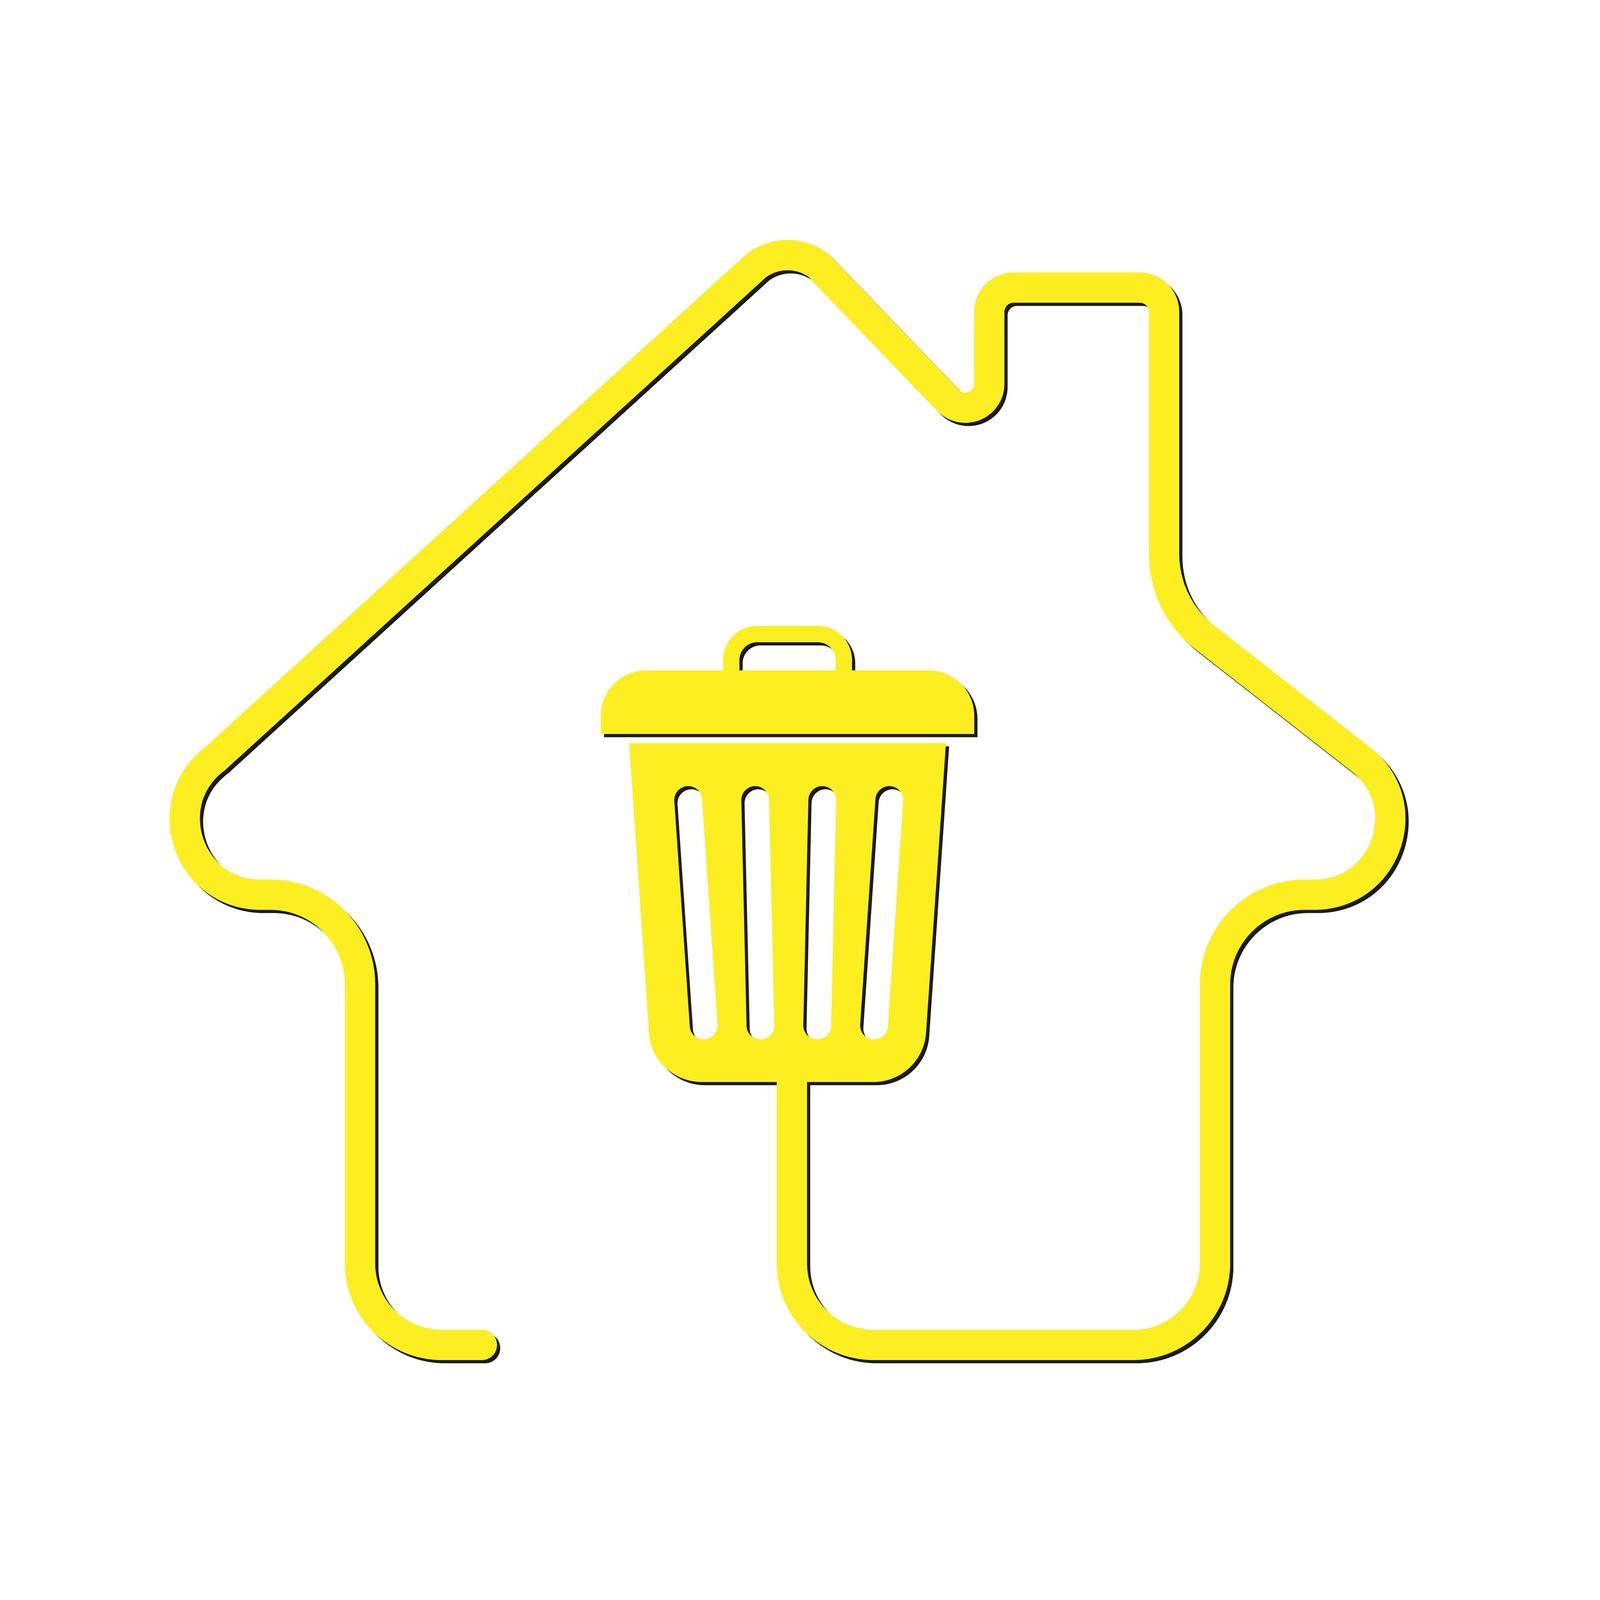 Garbage collection, utility icon. Vector stock illustration by Grommik